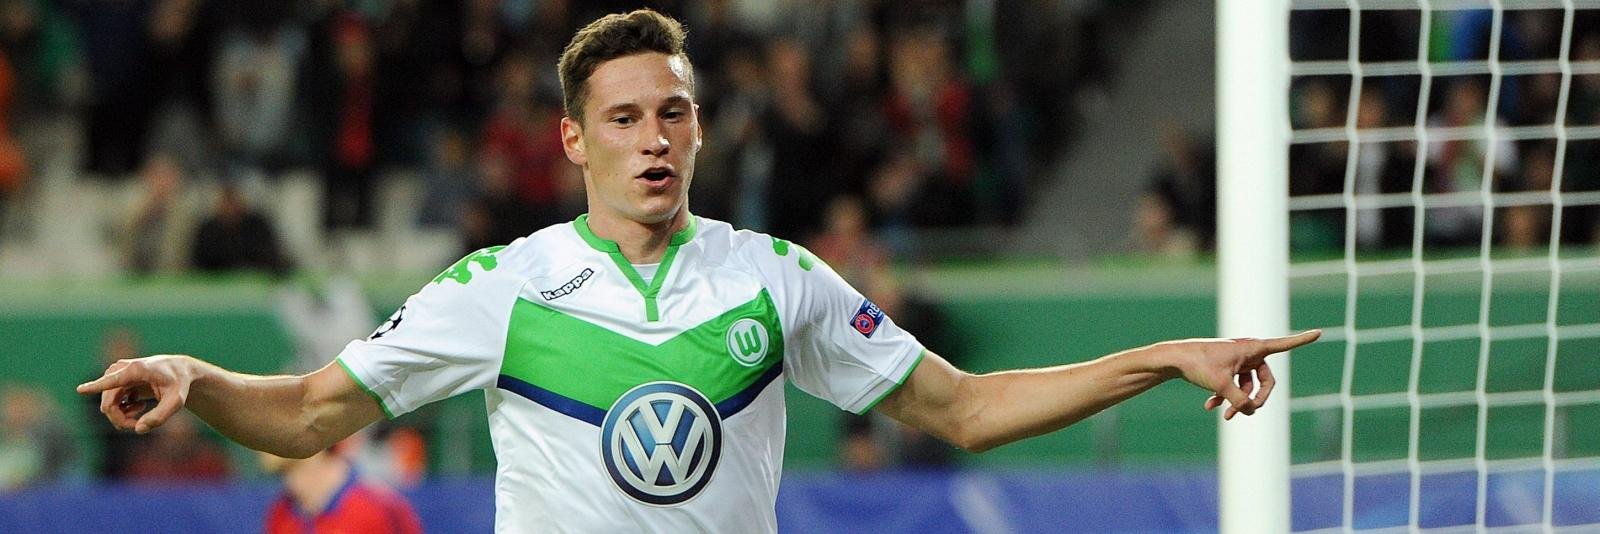 Arsenal launch £43m bid for Wolfsburg and Germany’s EURO 2016 ace